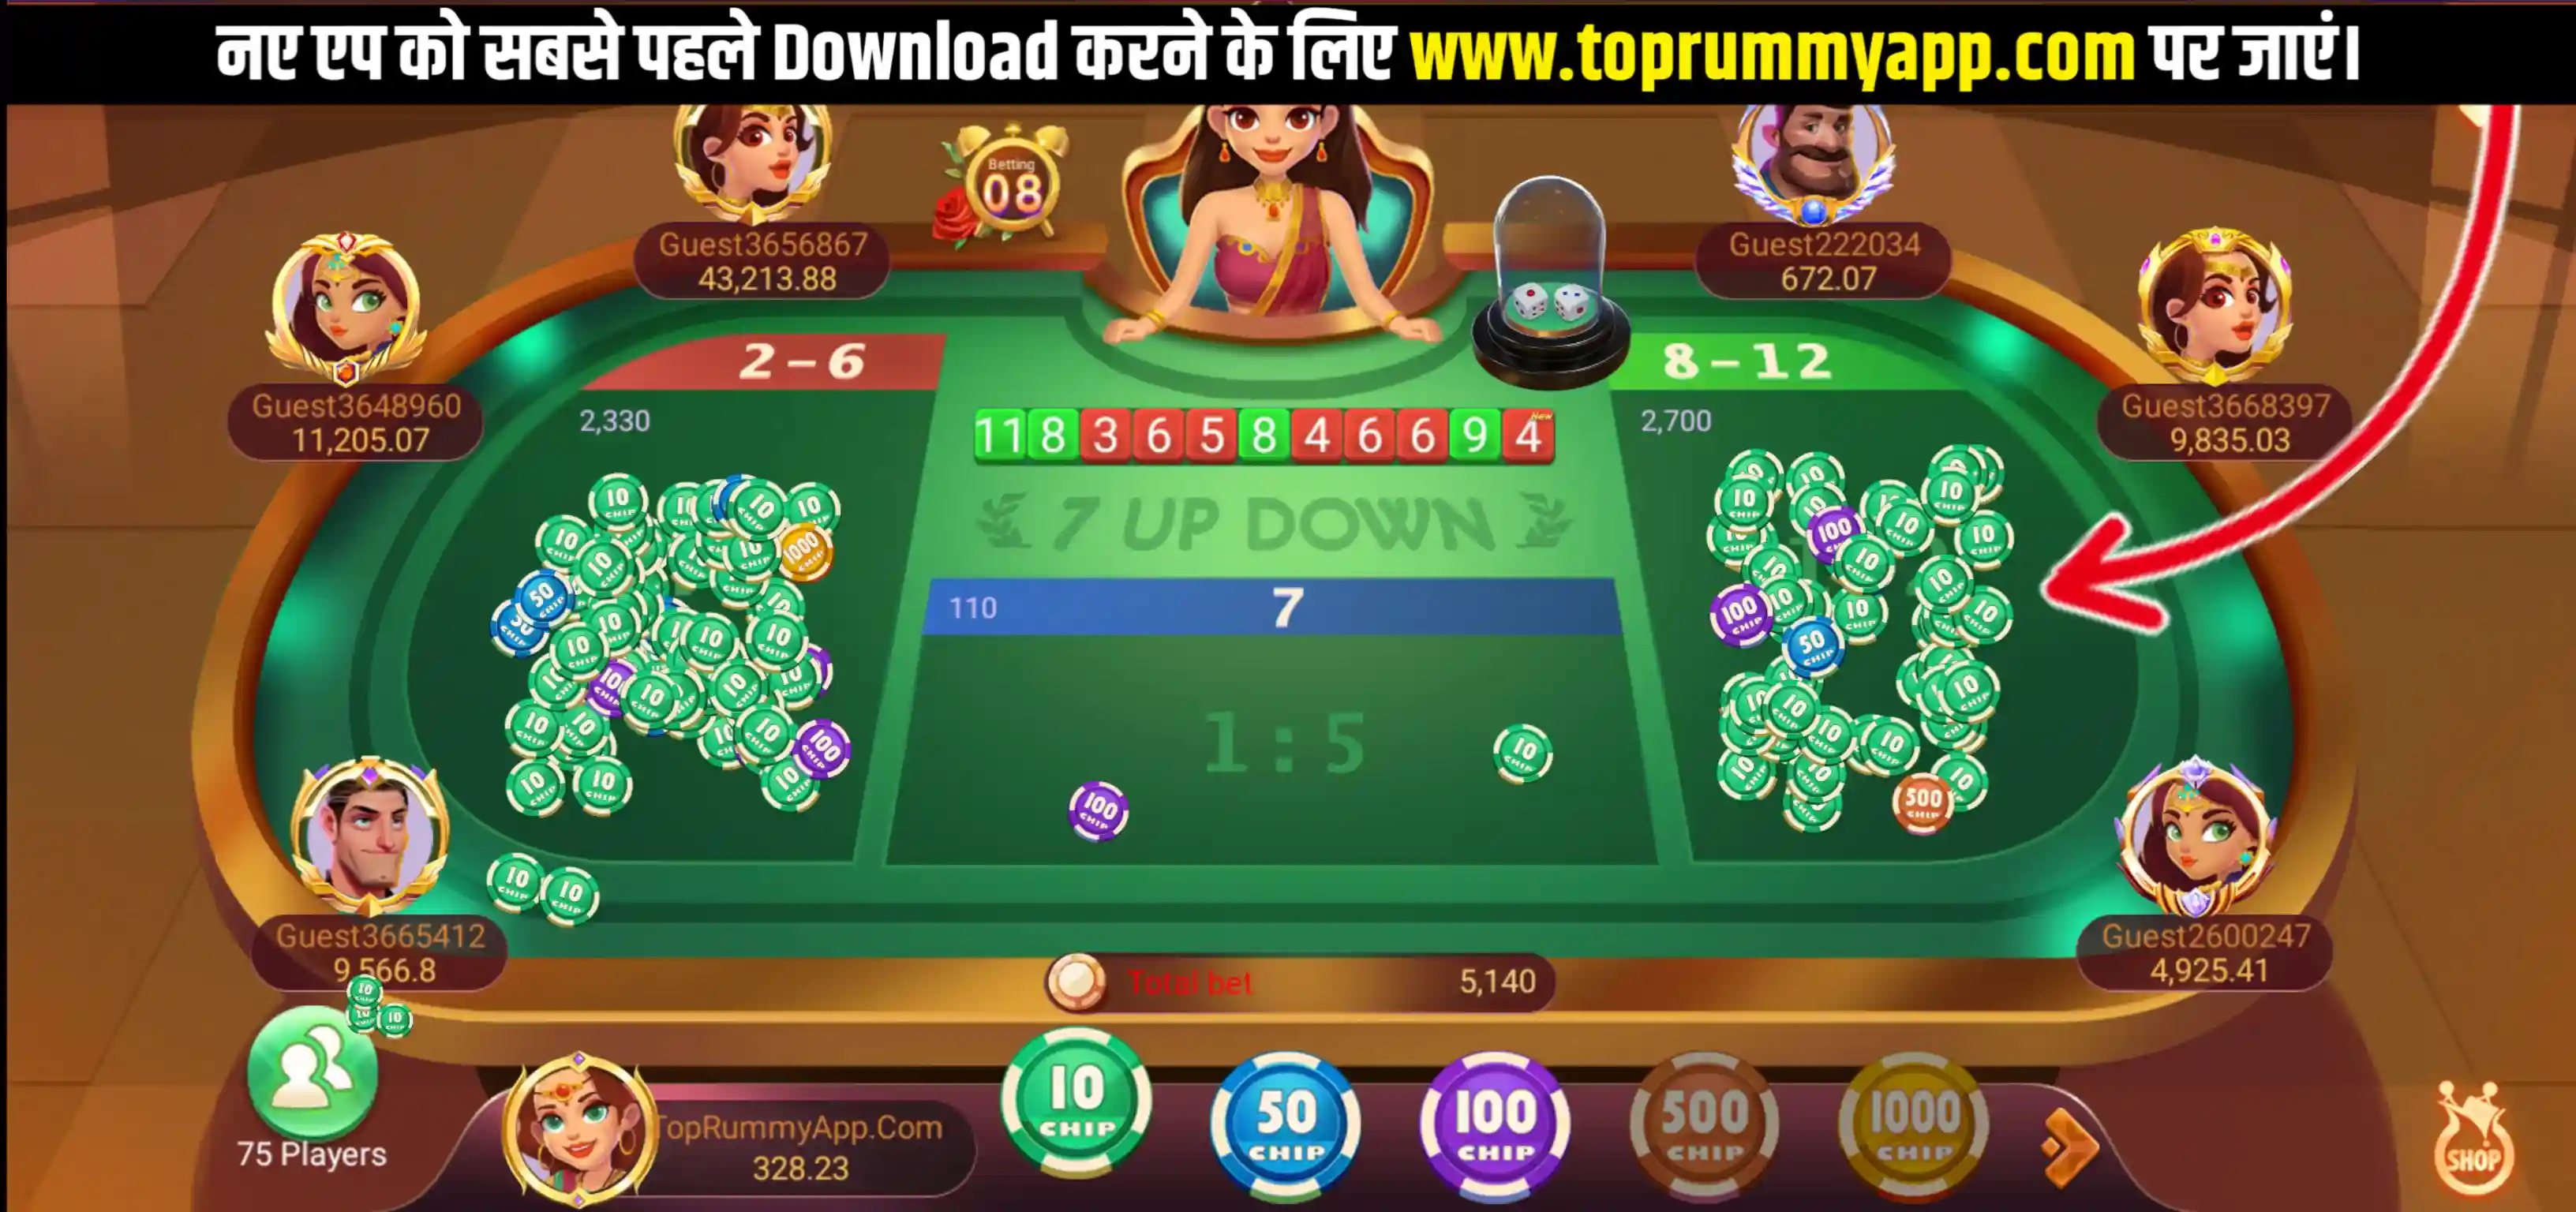 7 Up Down Games Play Top Rummy App